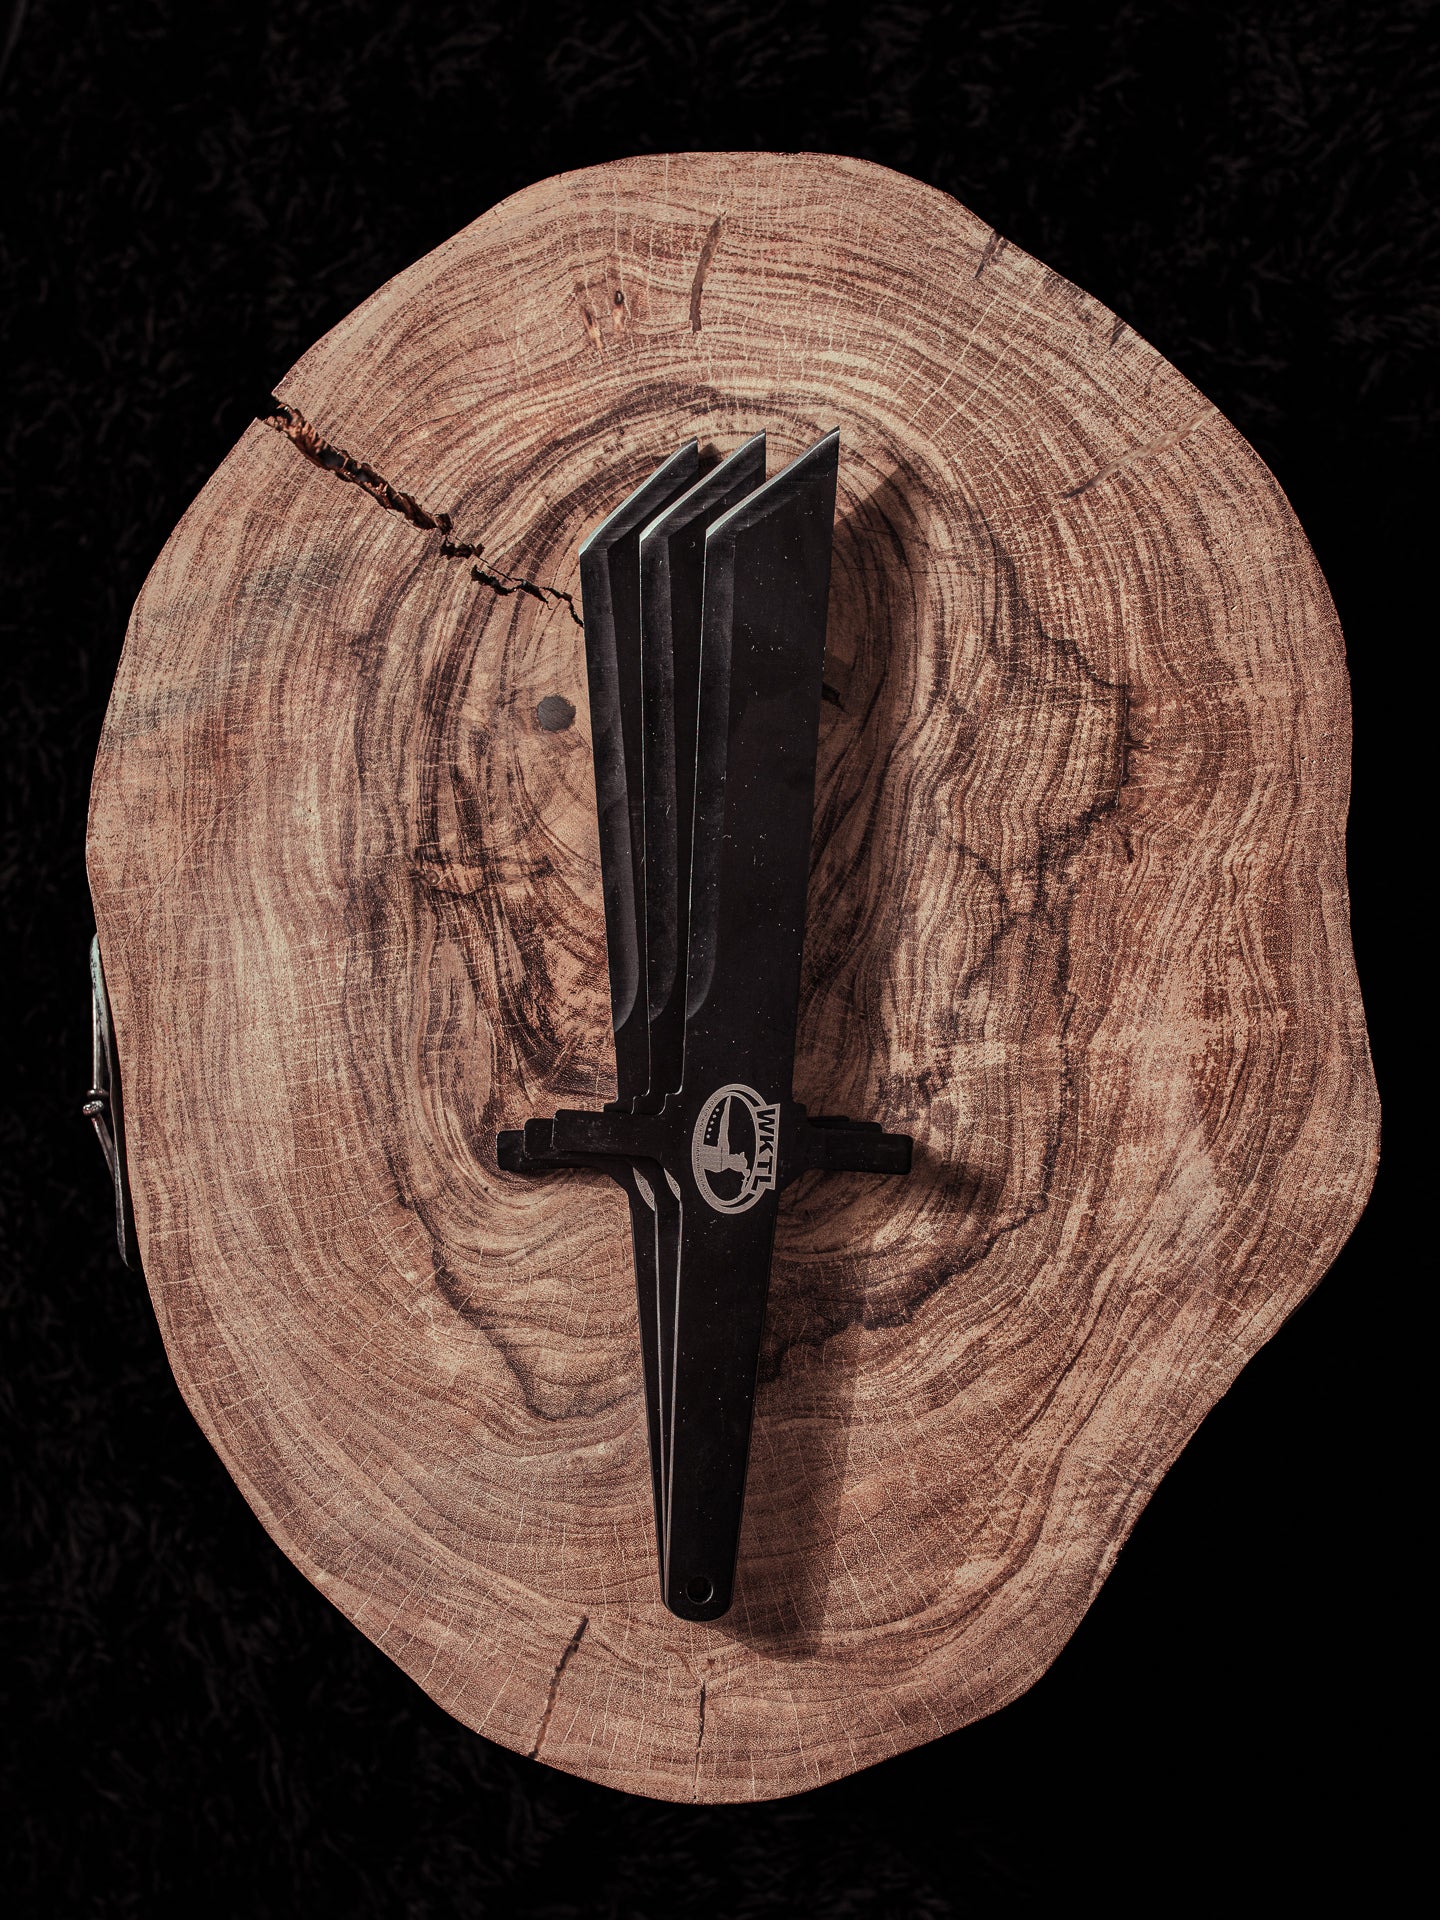 World Knife Throwing League (WKTL) Certified Competition Throwing Knife, The Tobi